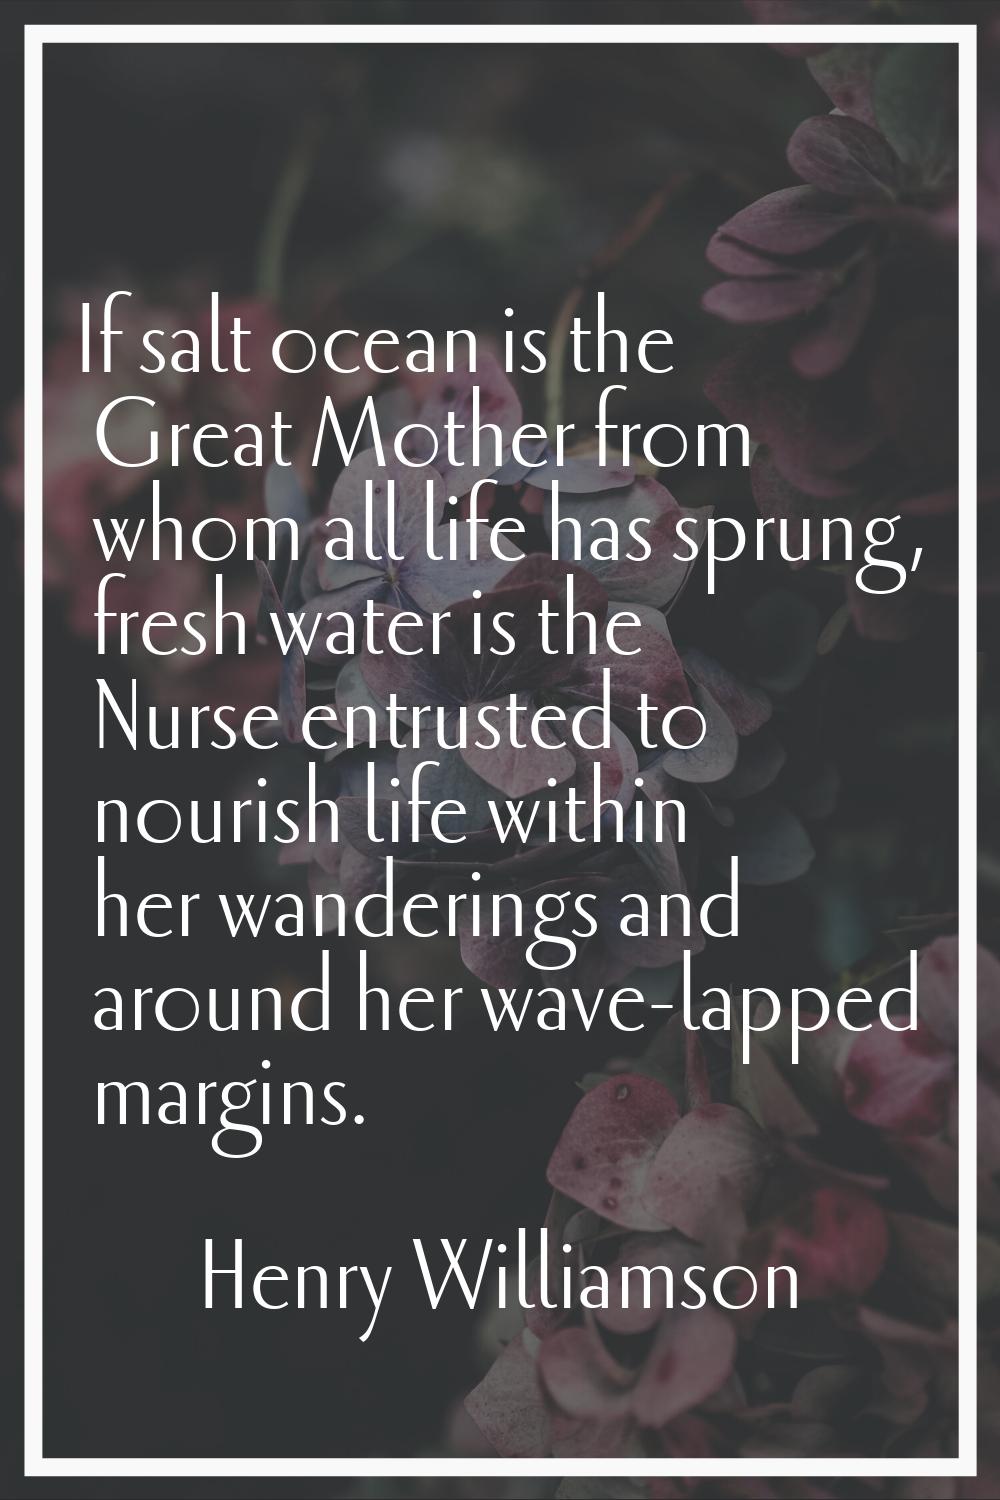 If salt ocean is the Great Mother from whom all life has sprung, fresh water is the Nurse entrusted